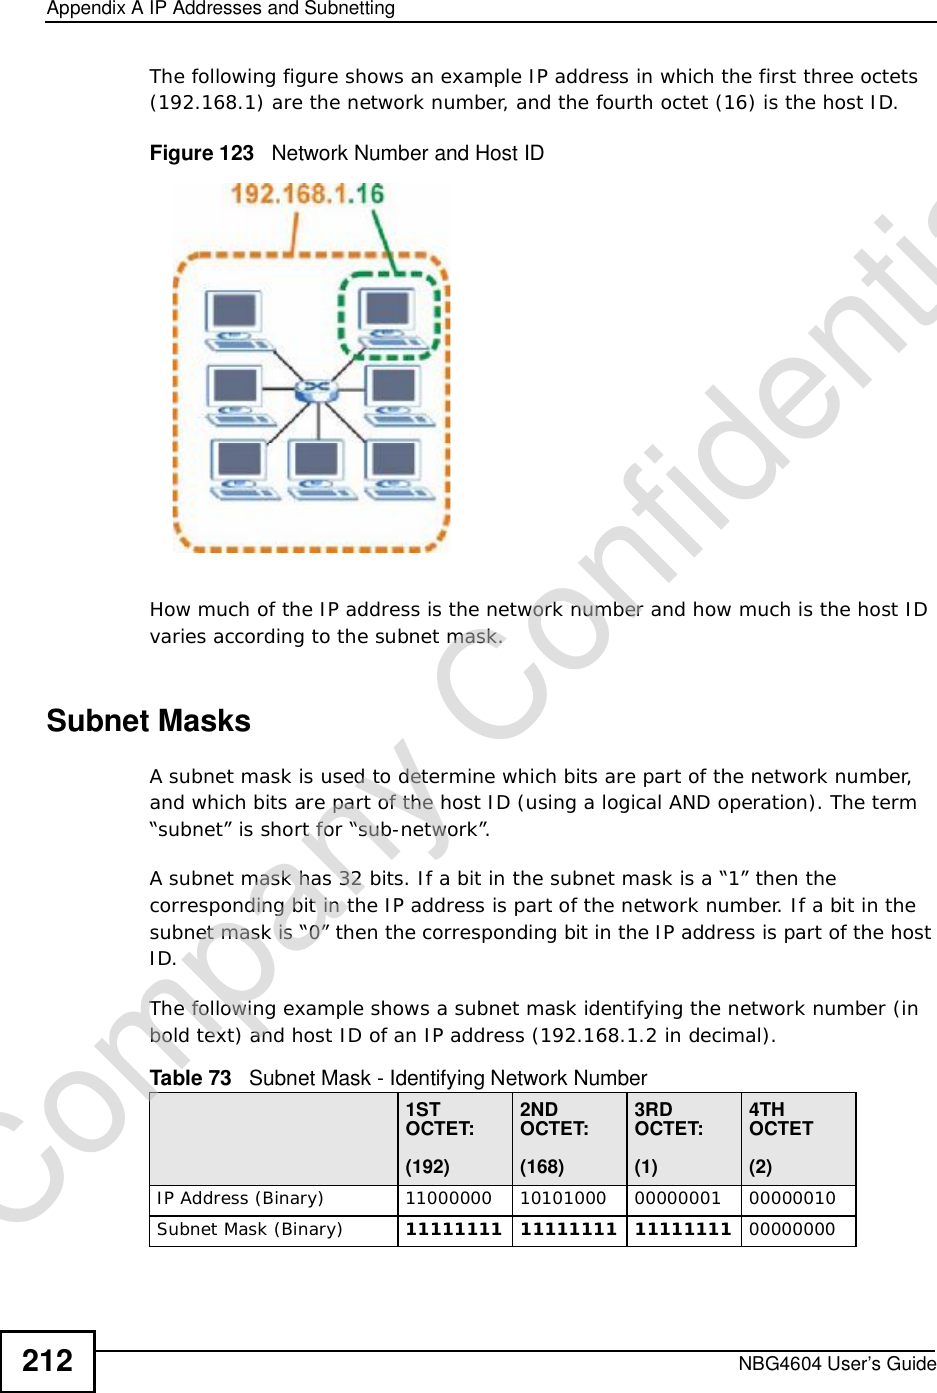 Appendix AIP Addresses and SubnettingNBG4604 User’s Guide212The following figure shows an example IP address in which the first three octets (192.168.1) are the network number, and the fourth octet (16) is the host ID.Figure 123   Network Number and Host IDHow much of the IP address is the network number and how much is the host ID varies according to the subnet mask. Subnet MasksA subnet mask is used to determine which bits are part of the network number, and which bits are part of the host ID (using a logical AND operation). The term “subnet” is short for “sub-network”.A subnet mask has 32 bits. If a bit in the subnet mask is a “1” then the corresponding bit in the IP address is part of the network number. If a bit in the subnet mask is “0” then the corresponding bit in the IP address is part of the host ID. The following example shows a subnet mask identifying the network number (in bold text) and host ID of an IP address (192.168.1.2 in decimal).Table 73   Subnet Mask - Identifying Network Number1STOCTET:(192)2NDOCTET:(168)3RDOCTET:(1)4TH OCTET(2)IP Address (Binary)11000000101010000000000100000010Subnet Mask (Binary) 111111111111111111111111 00000000Company Confidential